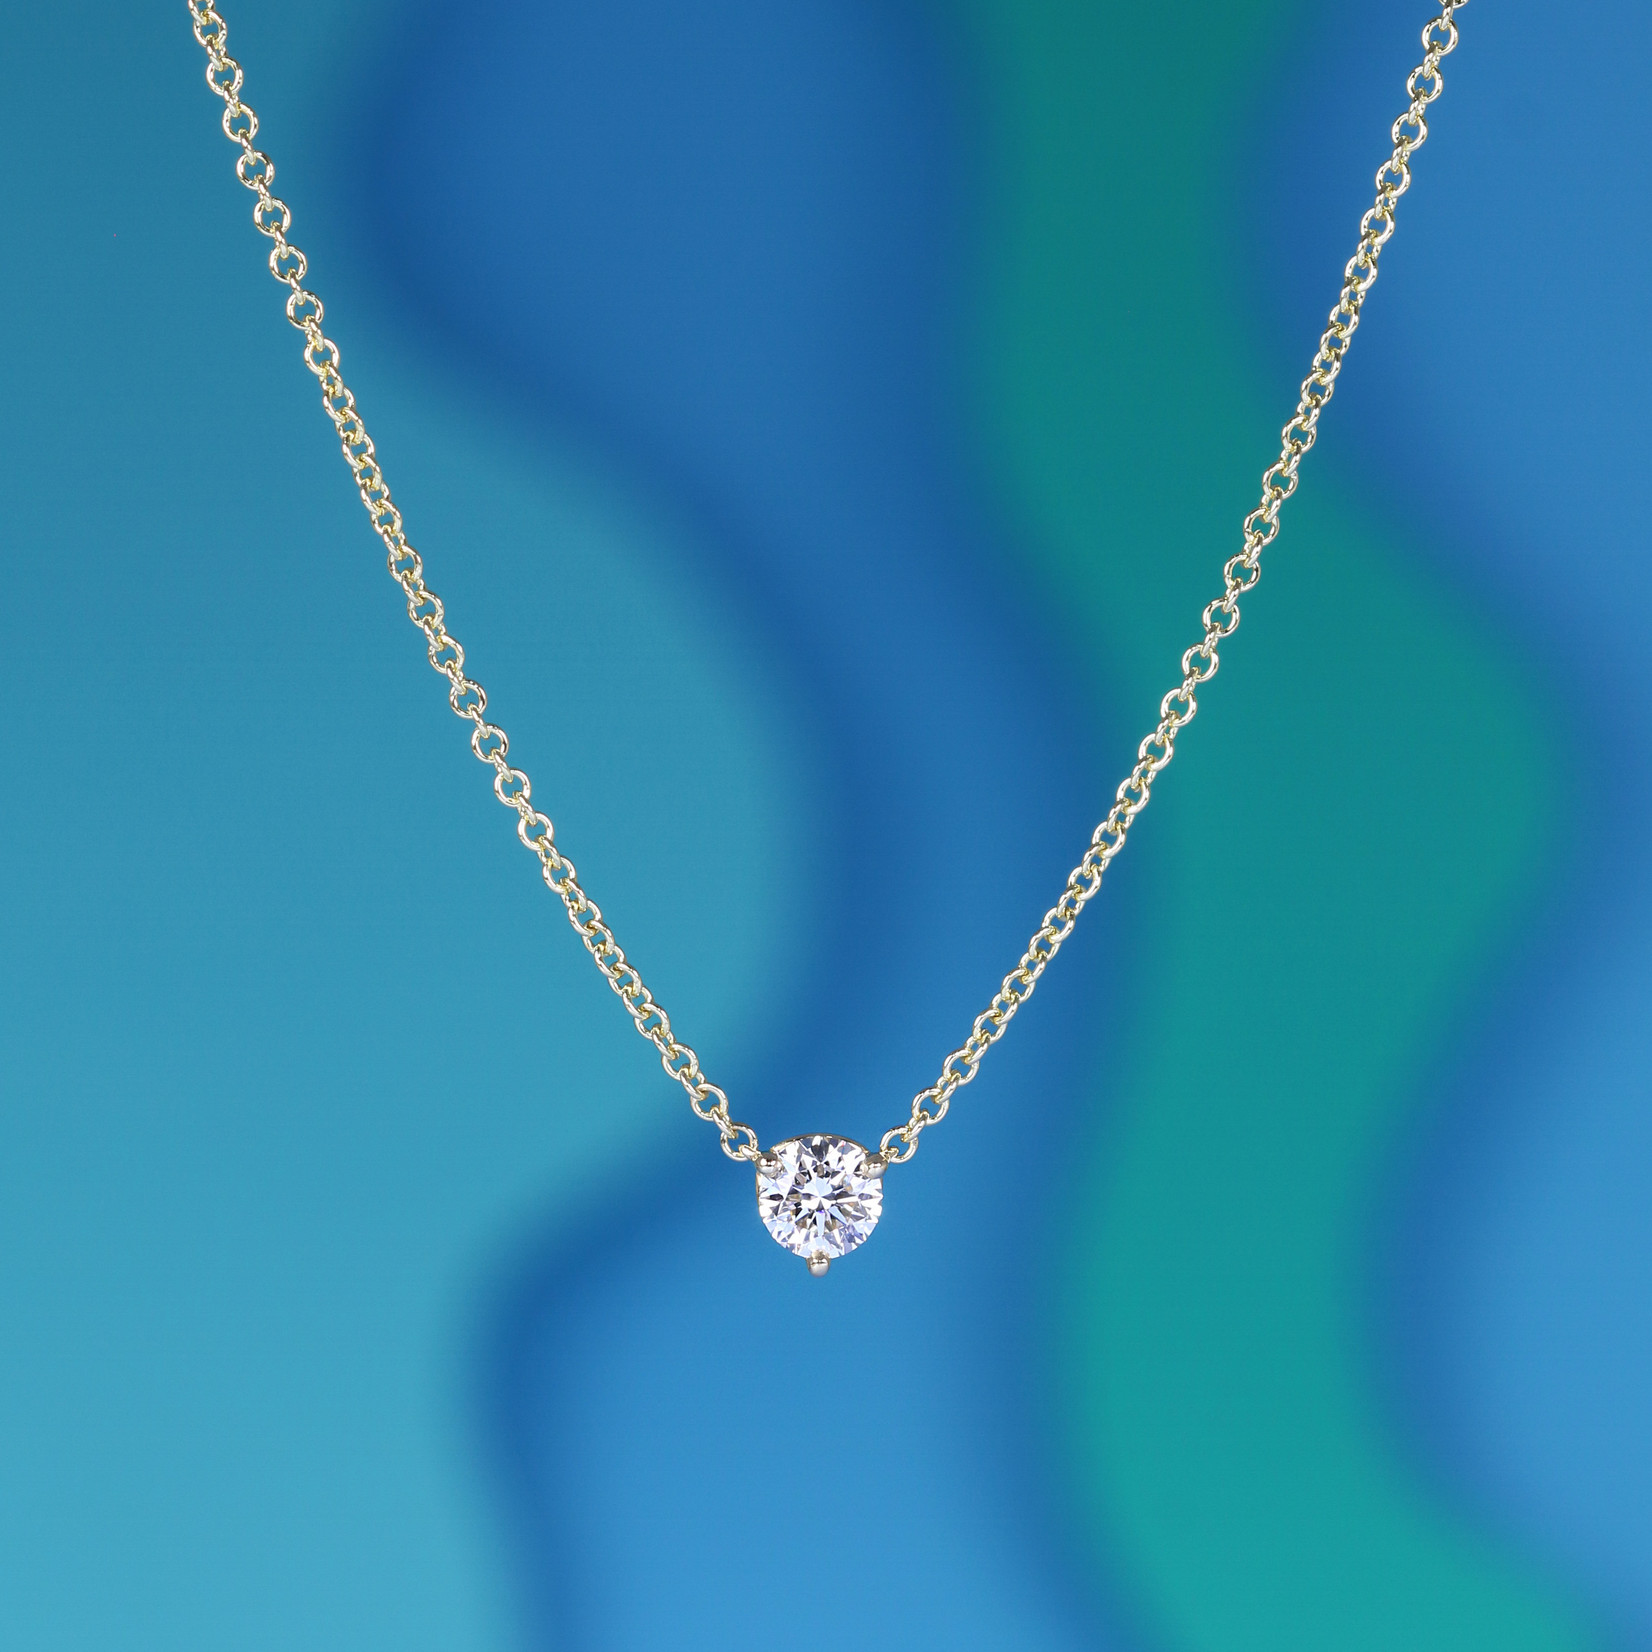 Baxter Moerman Diamond Solitaire Necklace 1/3ct in Yellow Gold